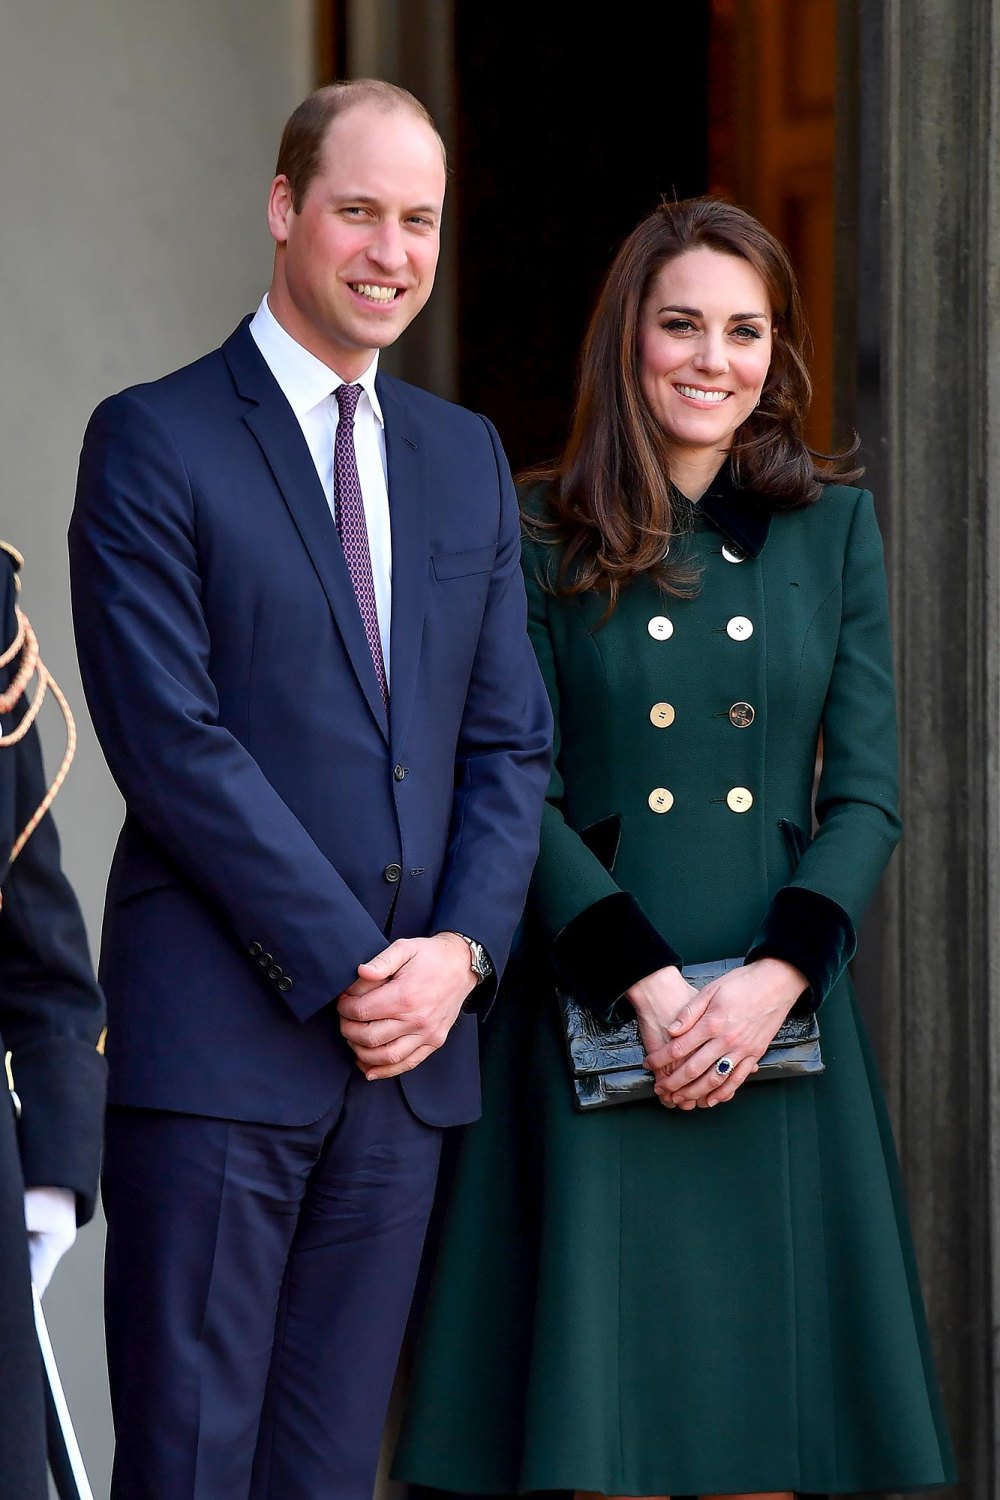 Prince William Returning to Official Royal Duties After Kate Middleton’s Cancer Diagnosis